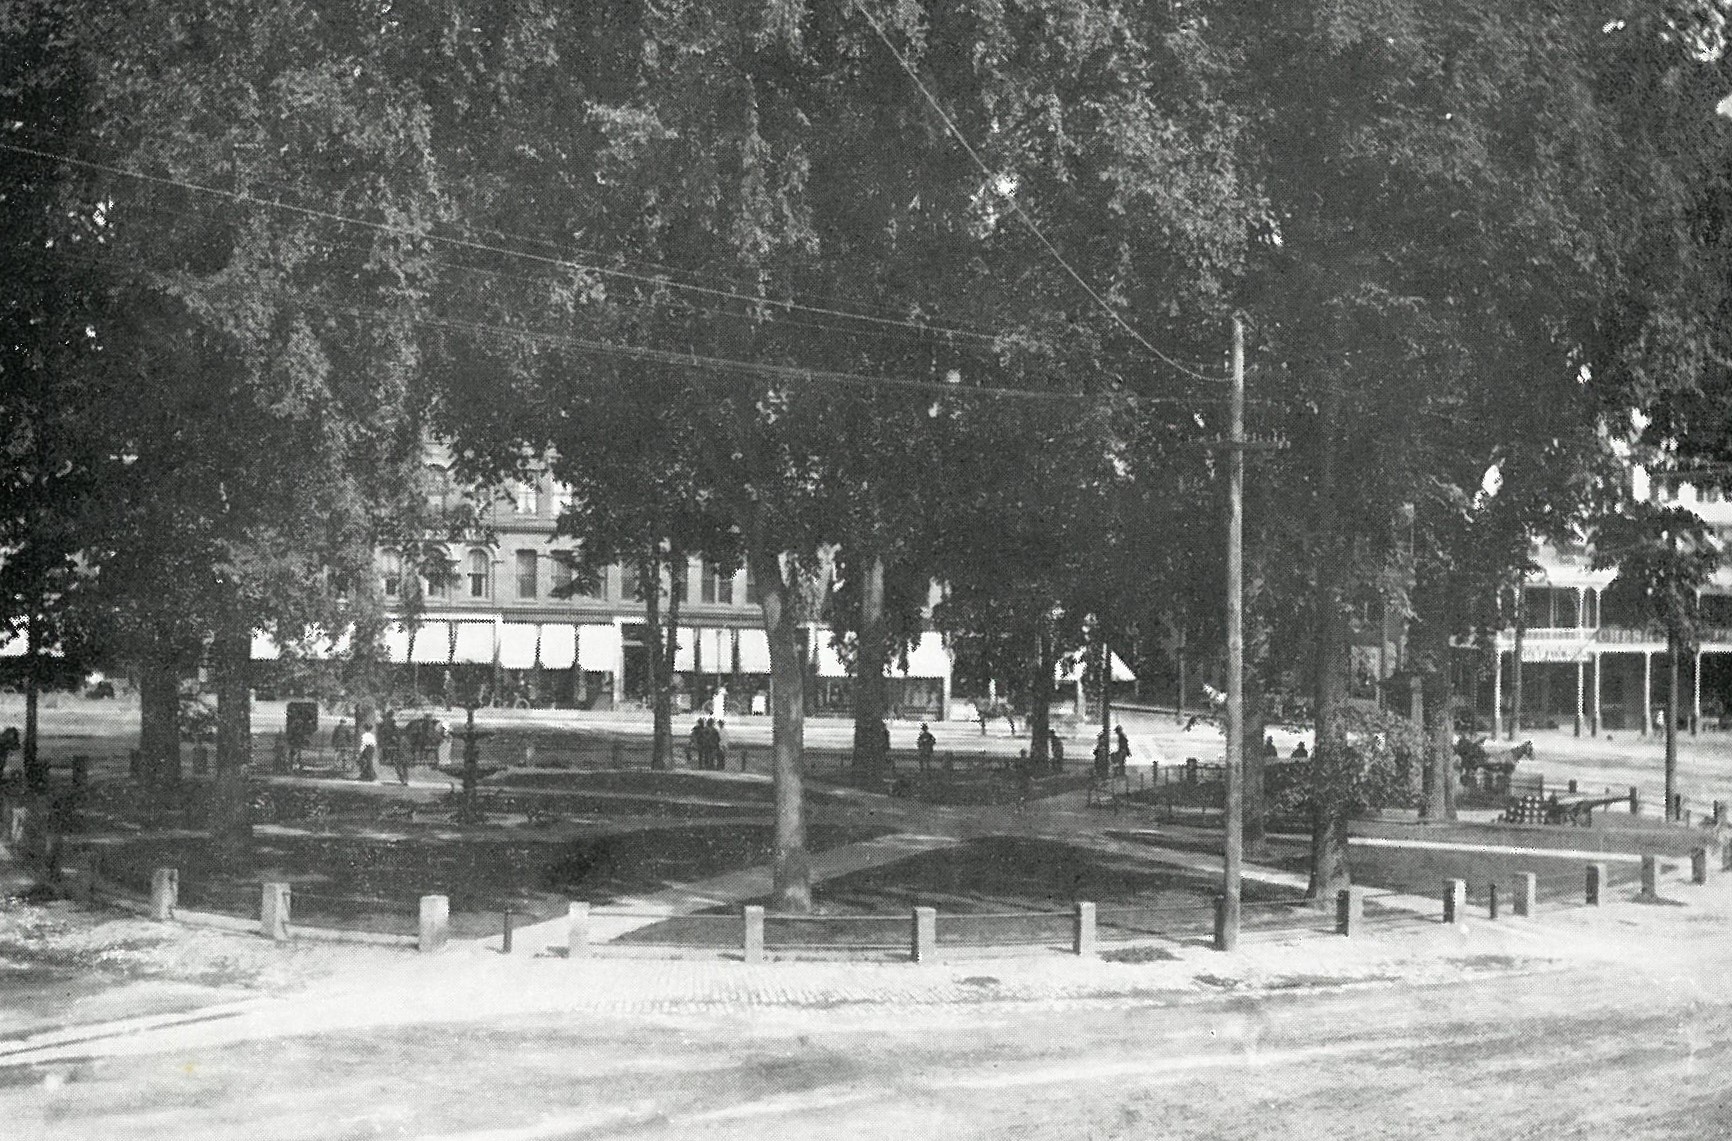 Keene in the mid 1900s